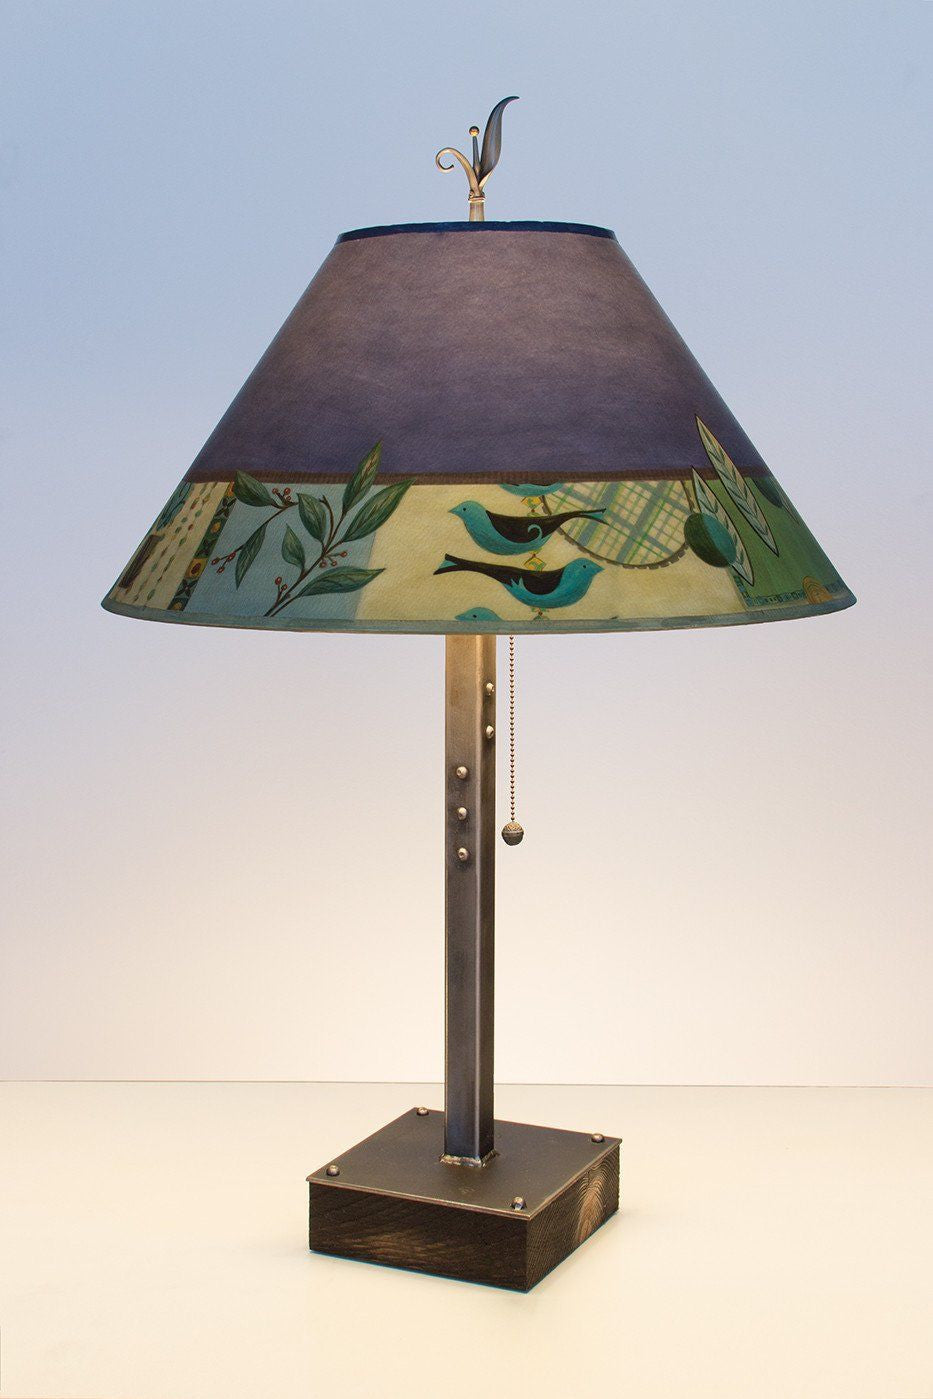 Steel Table Lamp on Wood with Large Conical Shade in New Capri Periwinkle